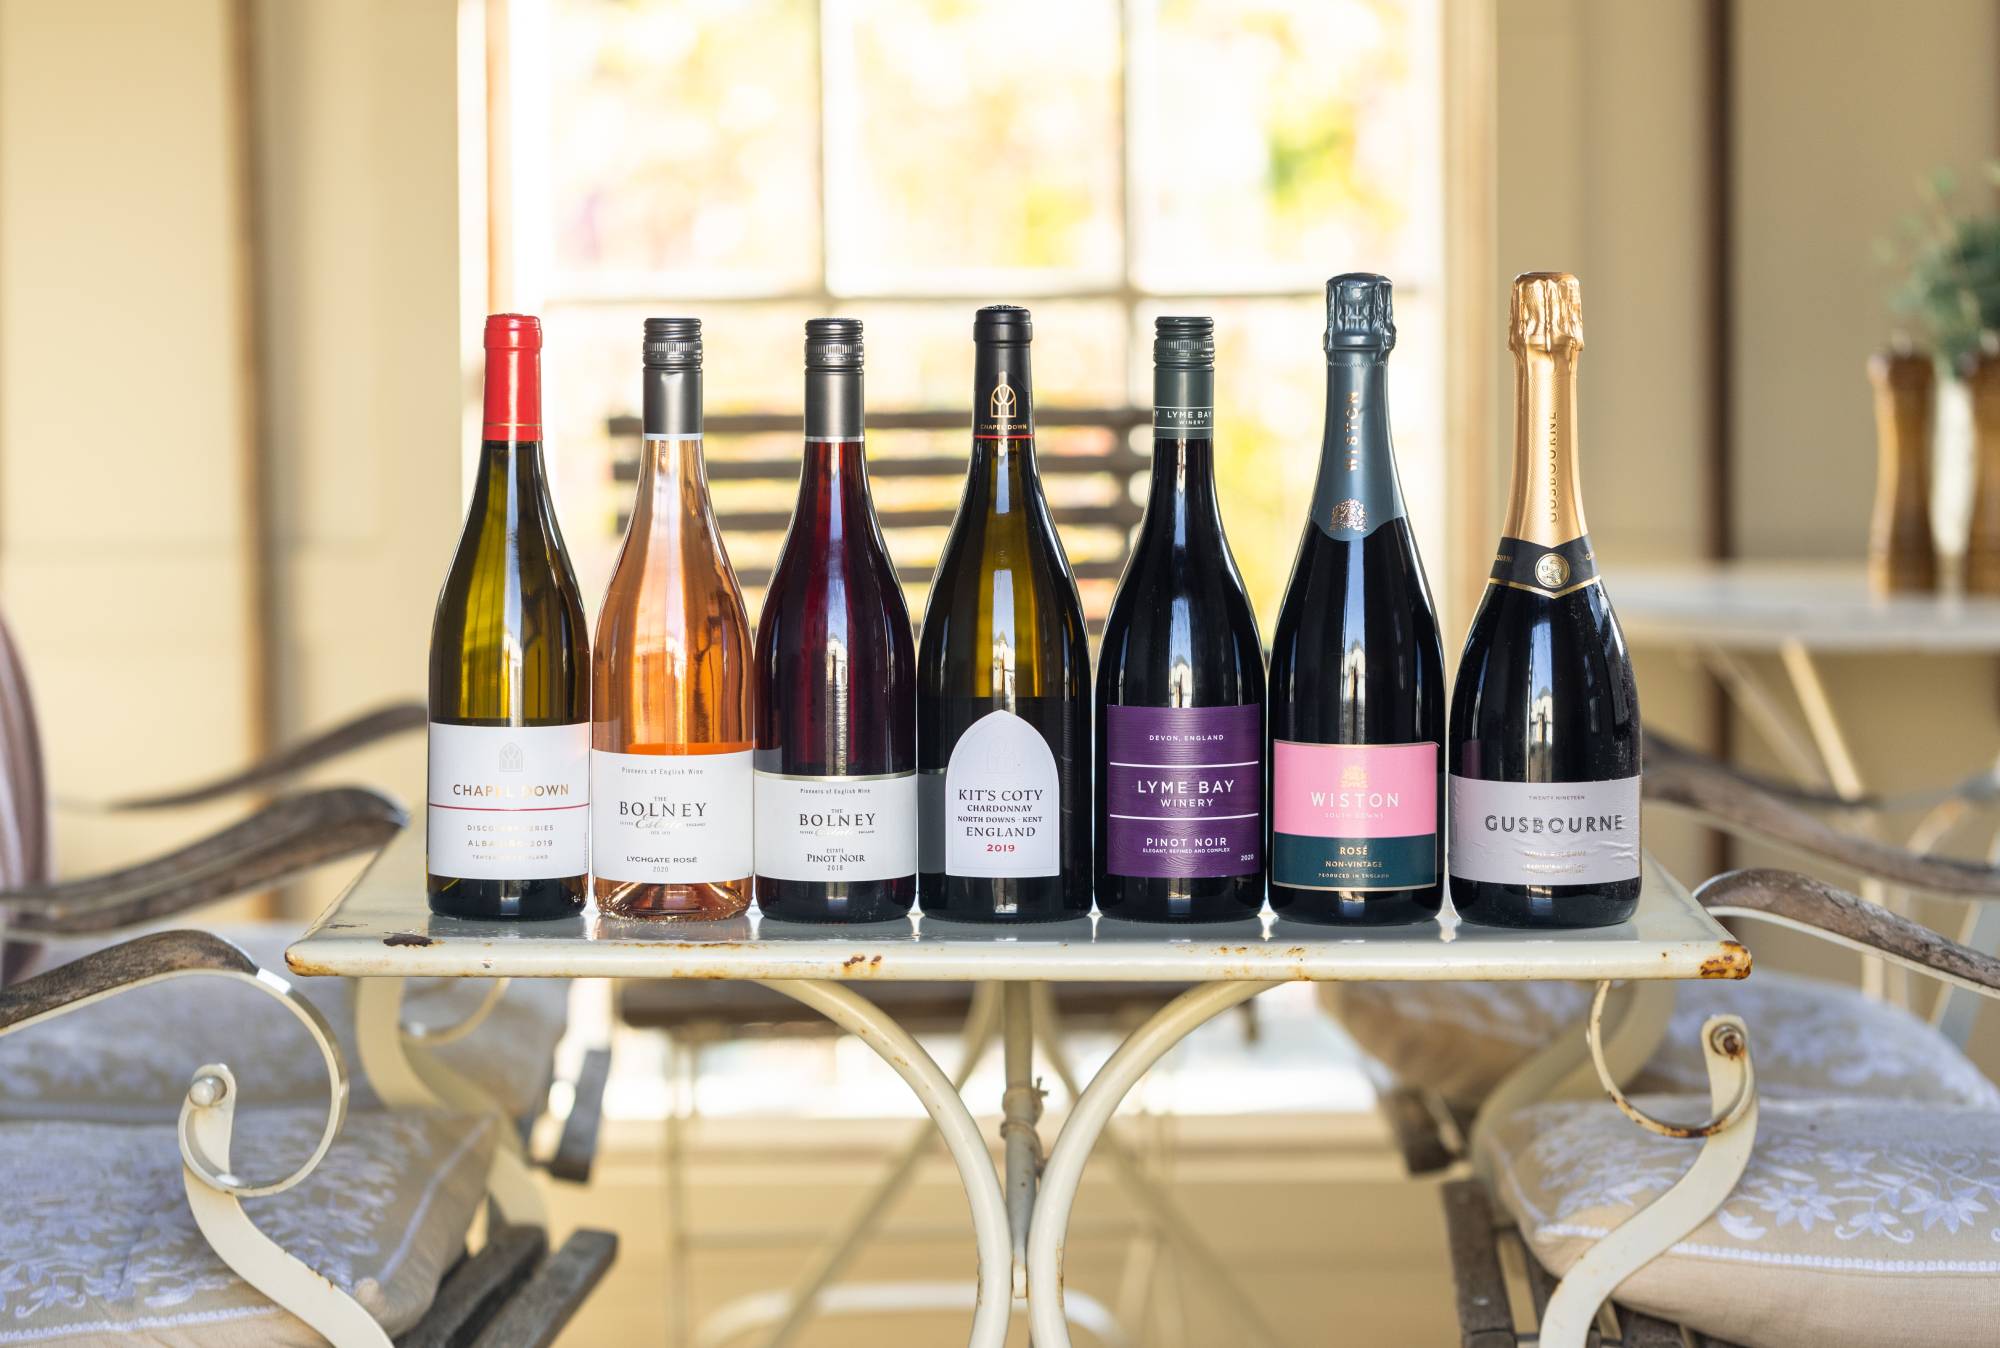 A Carefully Curated Selection of English Wines